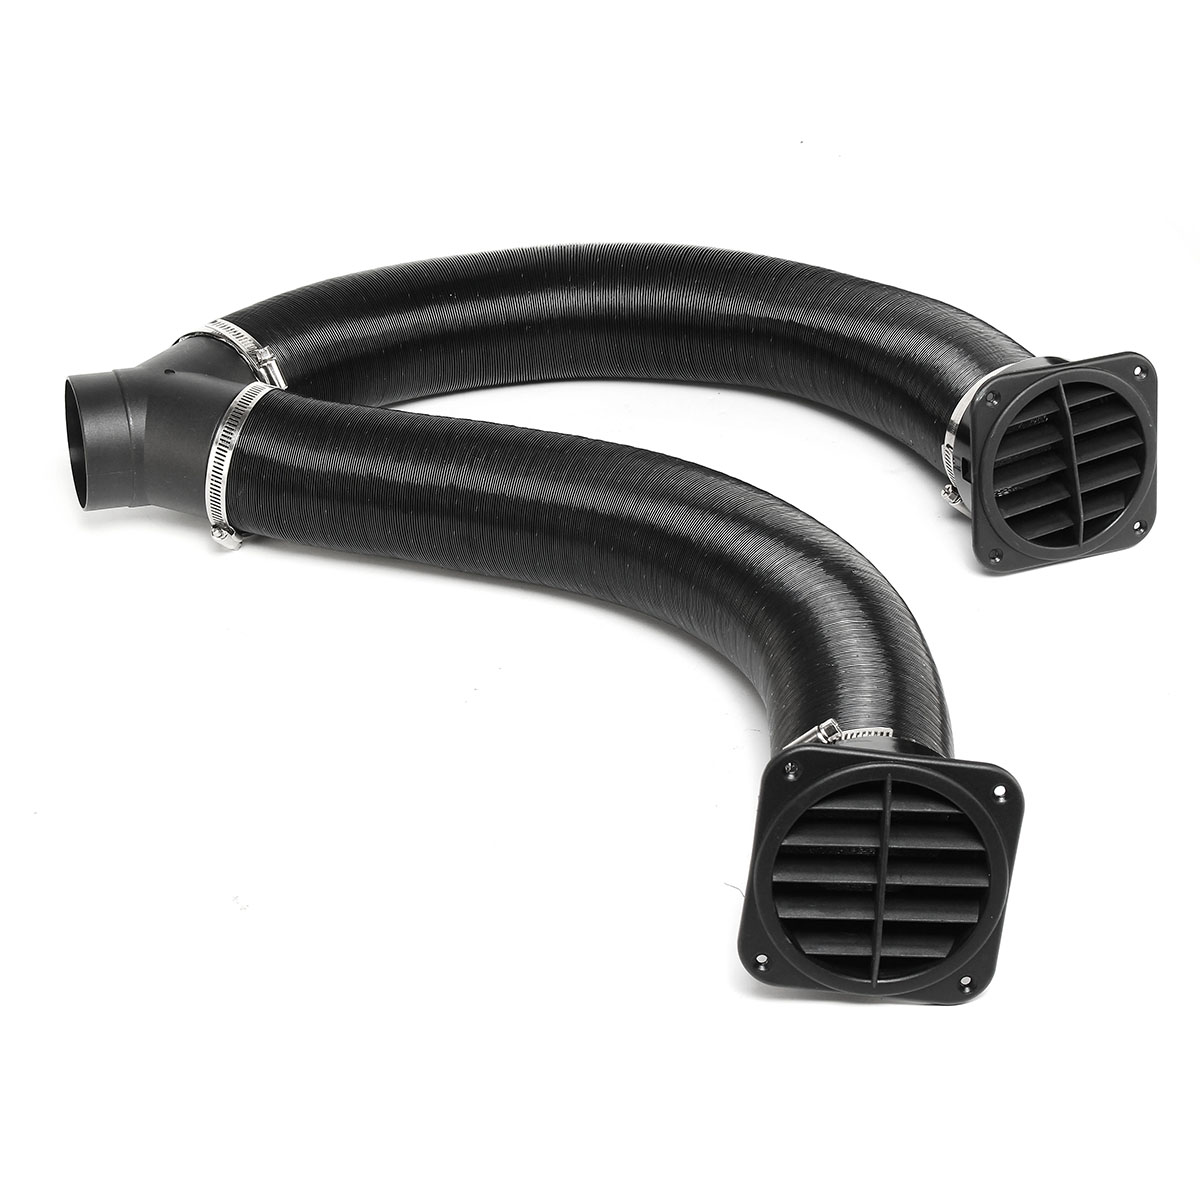 75mm-Heater-Pipe-Duct--Warm-Air-Outlet-For-Diesel-Heater-Webasto-Eberspacher-1396630-6